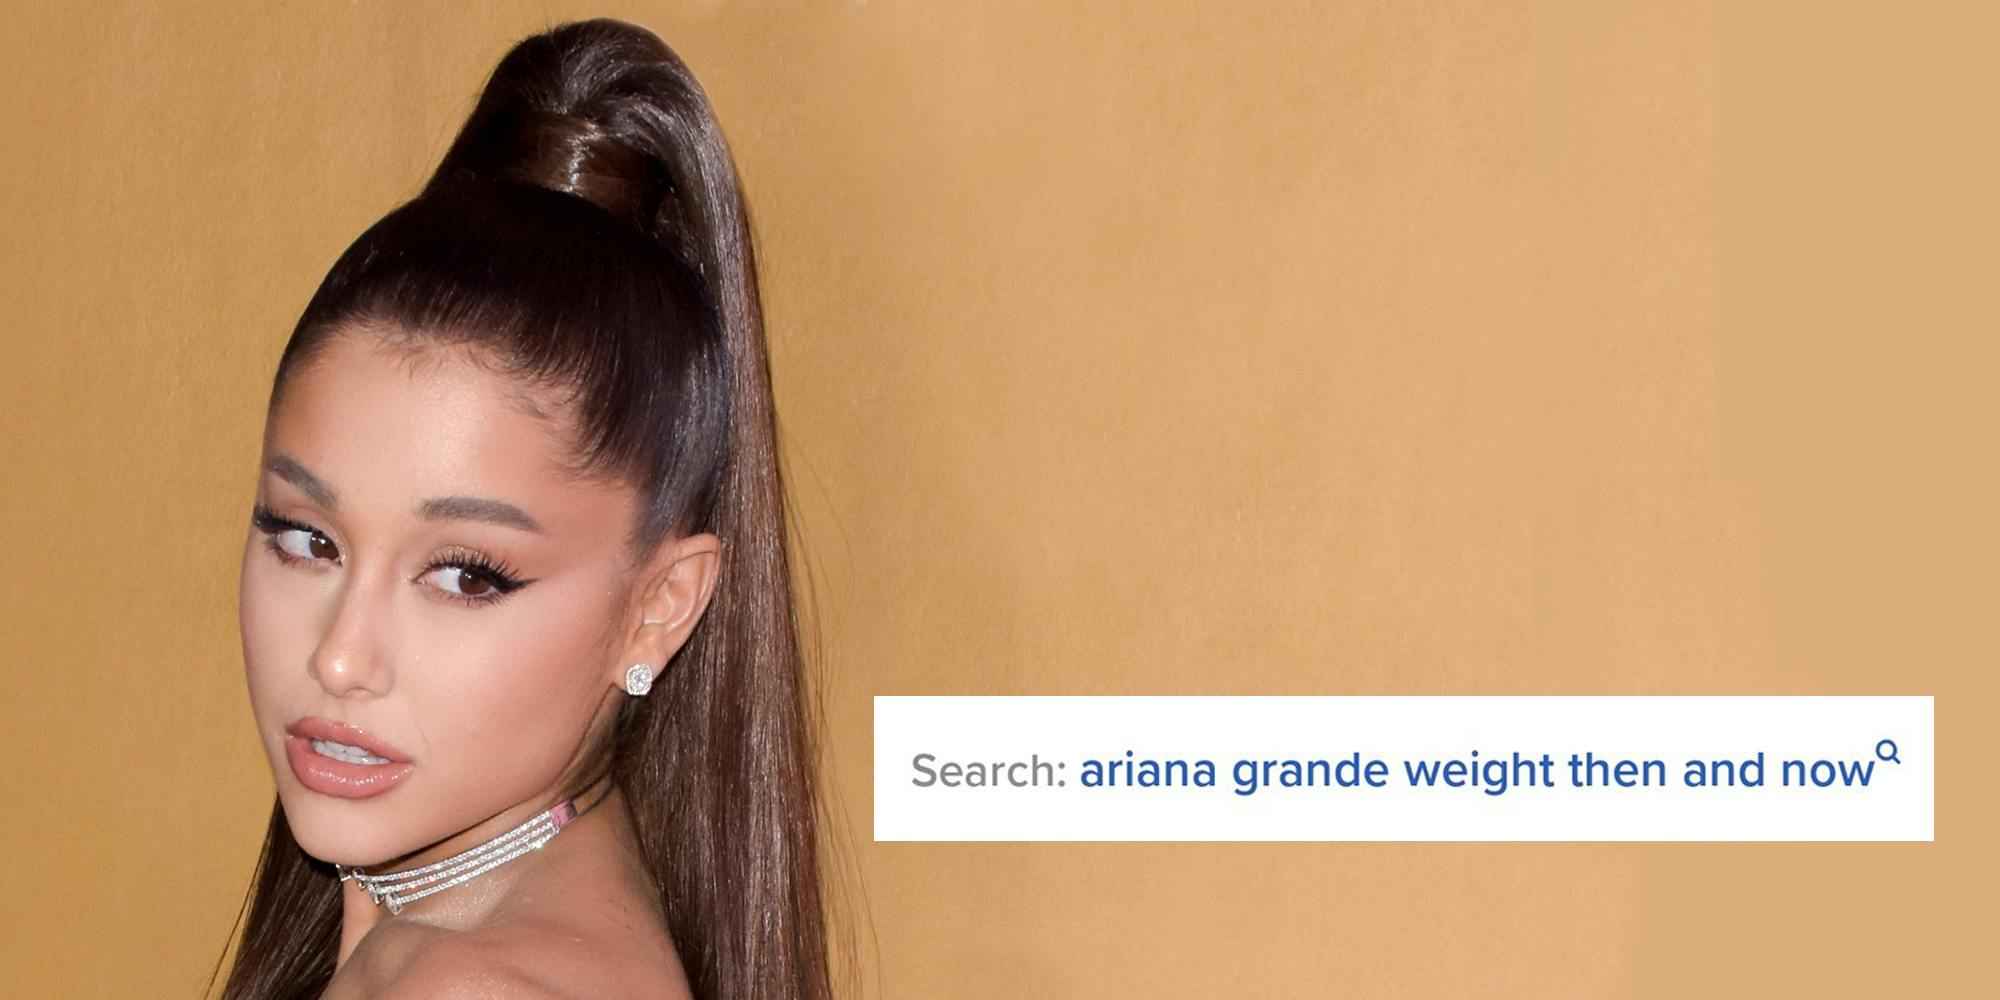 Ariana Grande in front of tan background with TikTok search to her right "ariana grande weight then and now"